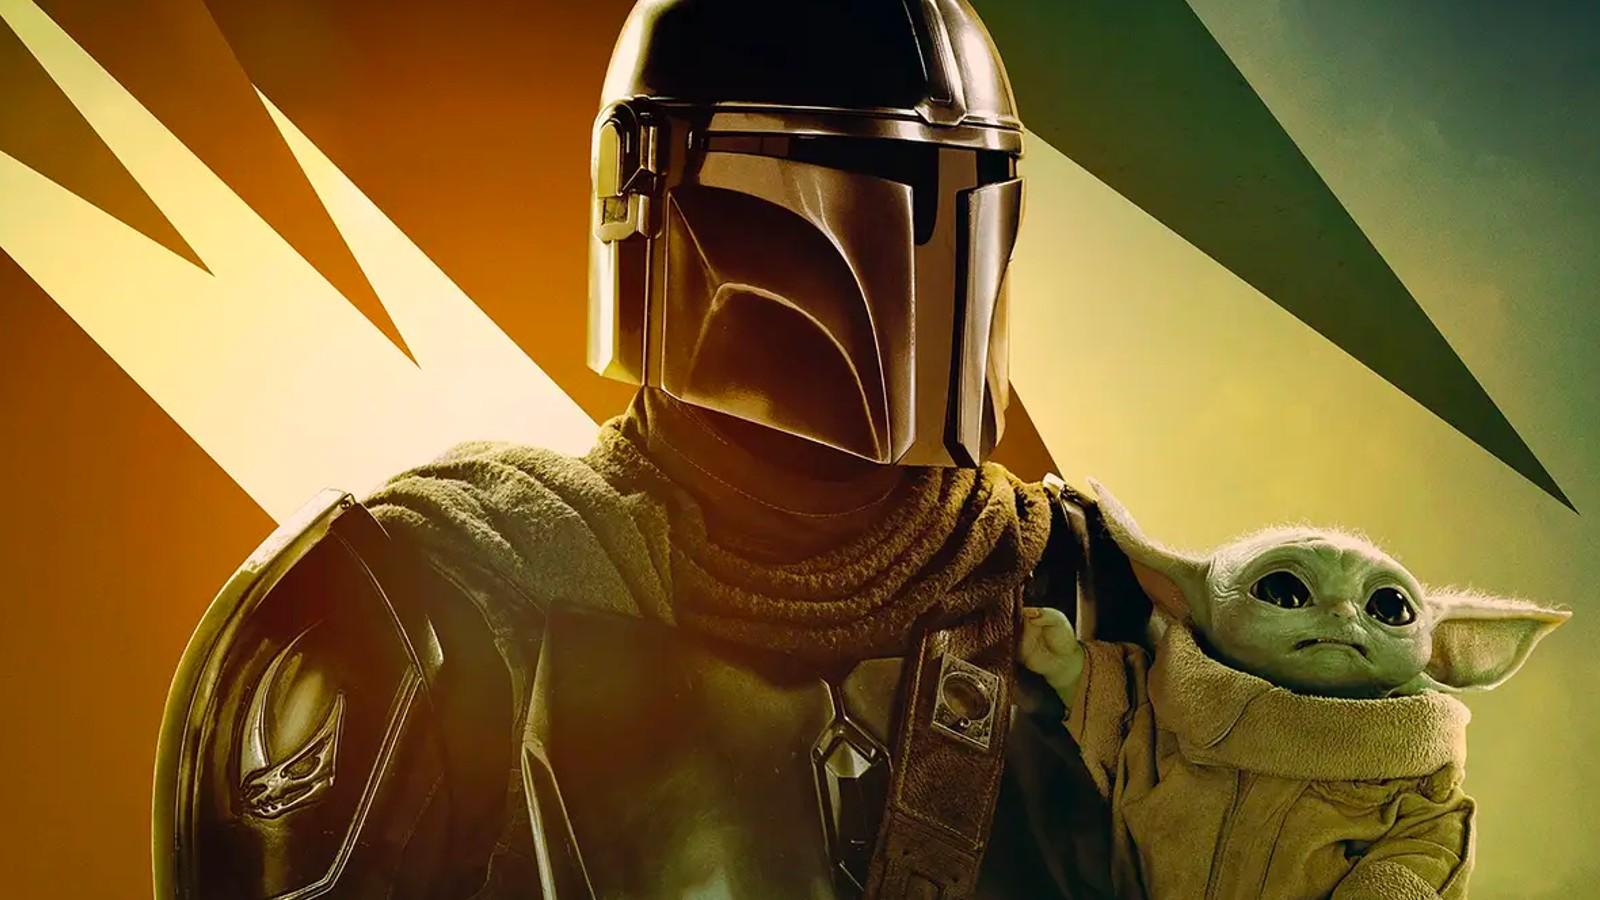 Who Is Jack Black in The Mandalorian? Captain Bombardier Explained